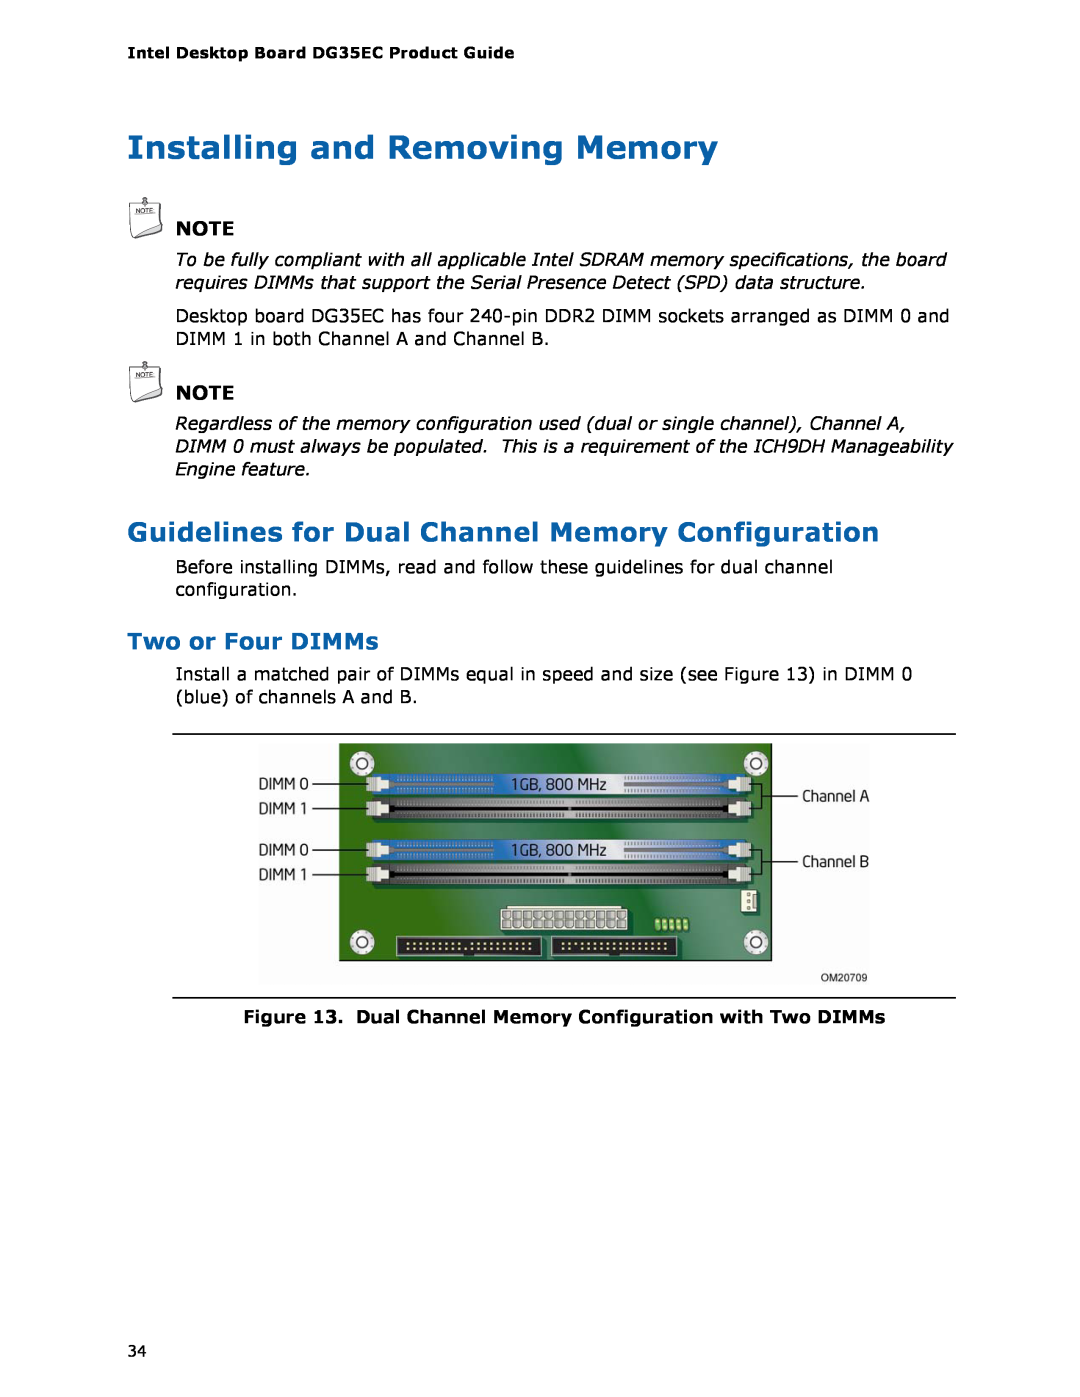 Intel Intel Desktop Board, DG35EC manual Installing and Removing Memory, Guidelines for Dual Channel Memory Configuration 